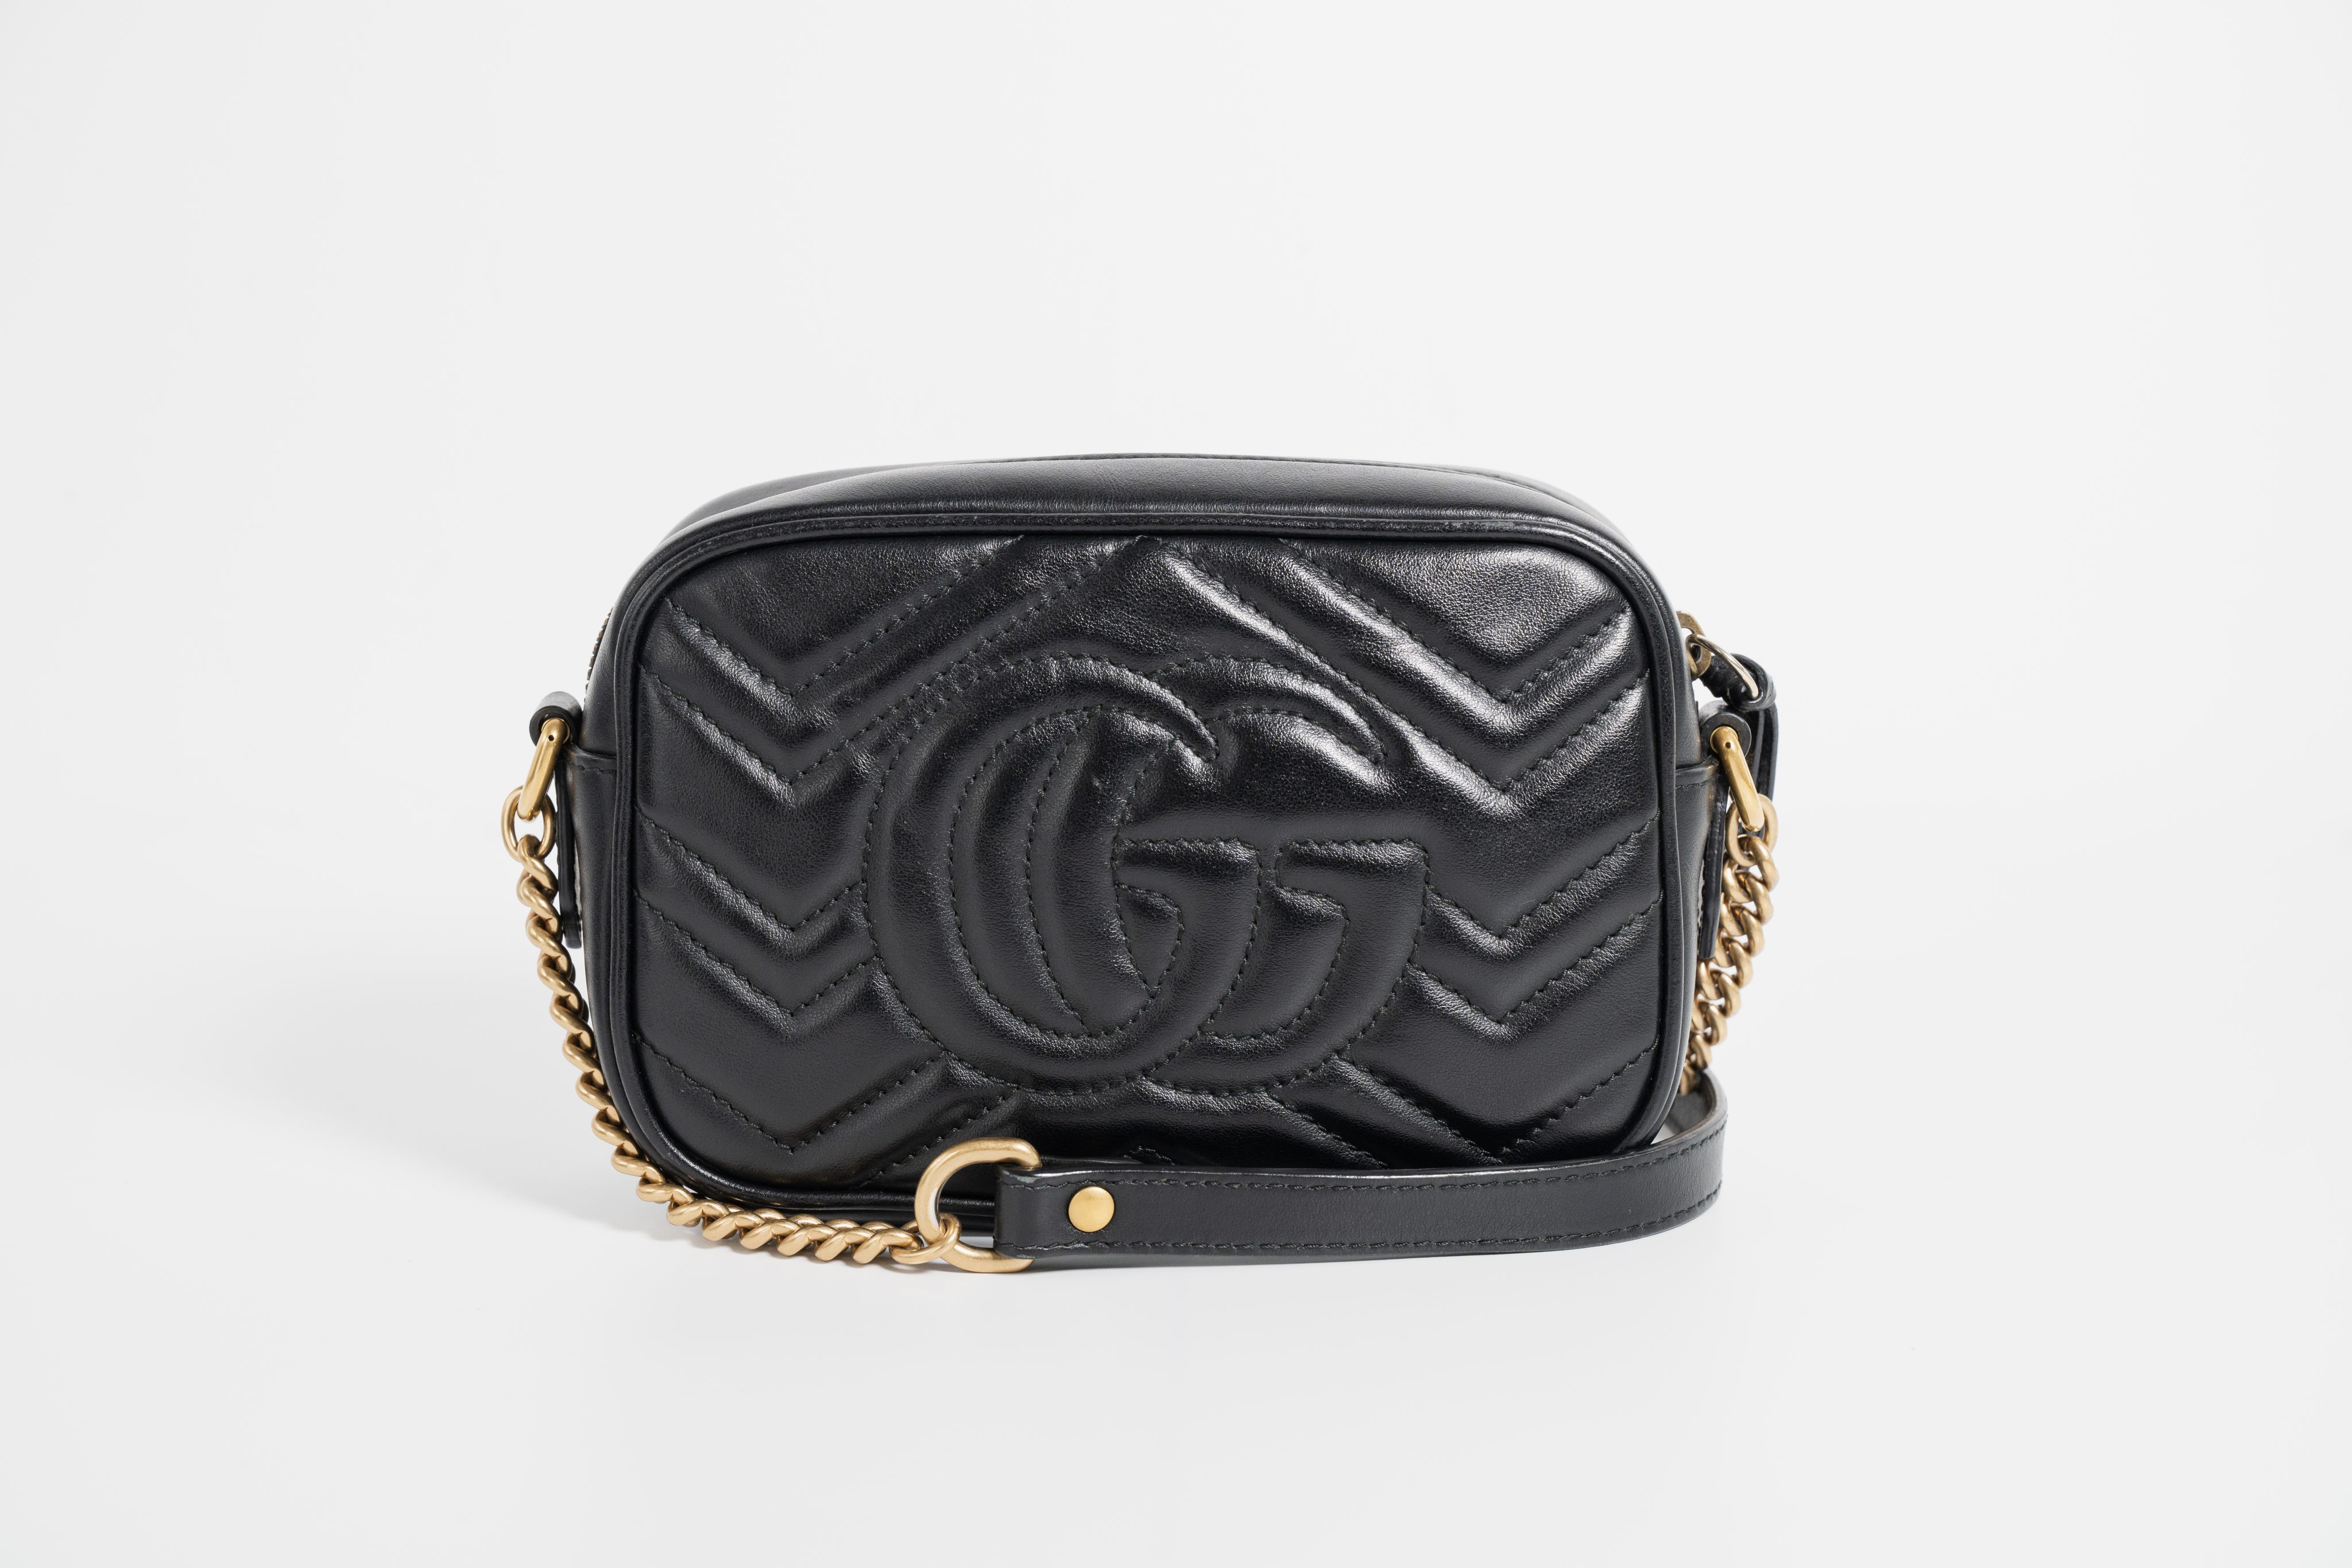 Gucci 'gg marmont' camera bag available on SUGAR - 148173